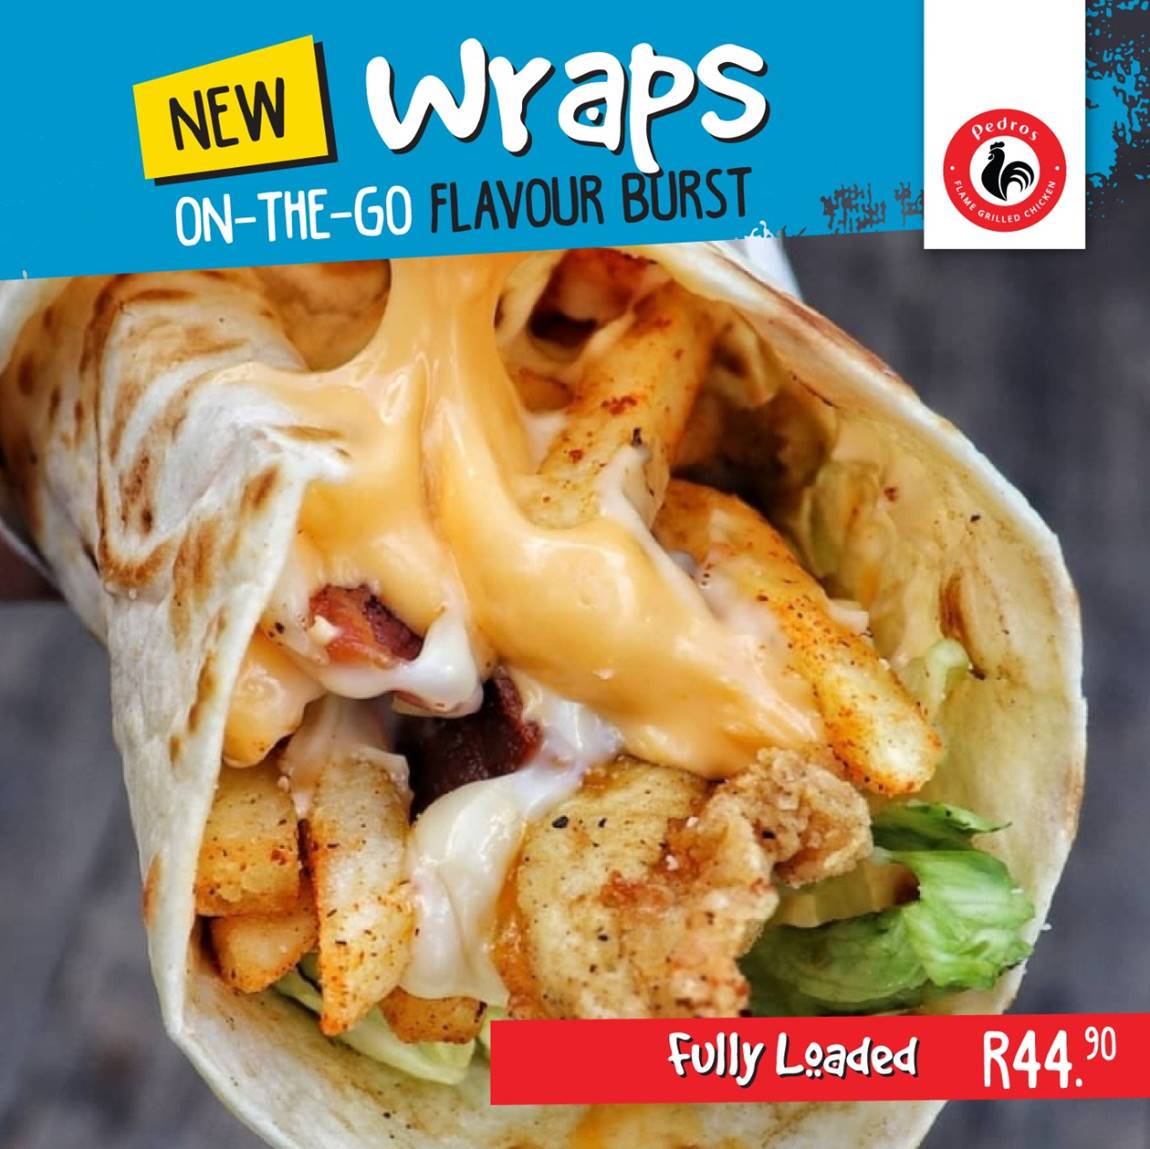 New Wraps on-the-go for R29.90 with Pedros Chicken - Johannesburg